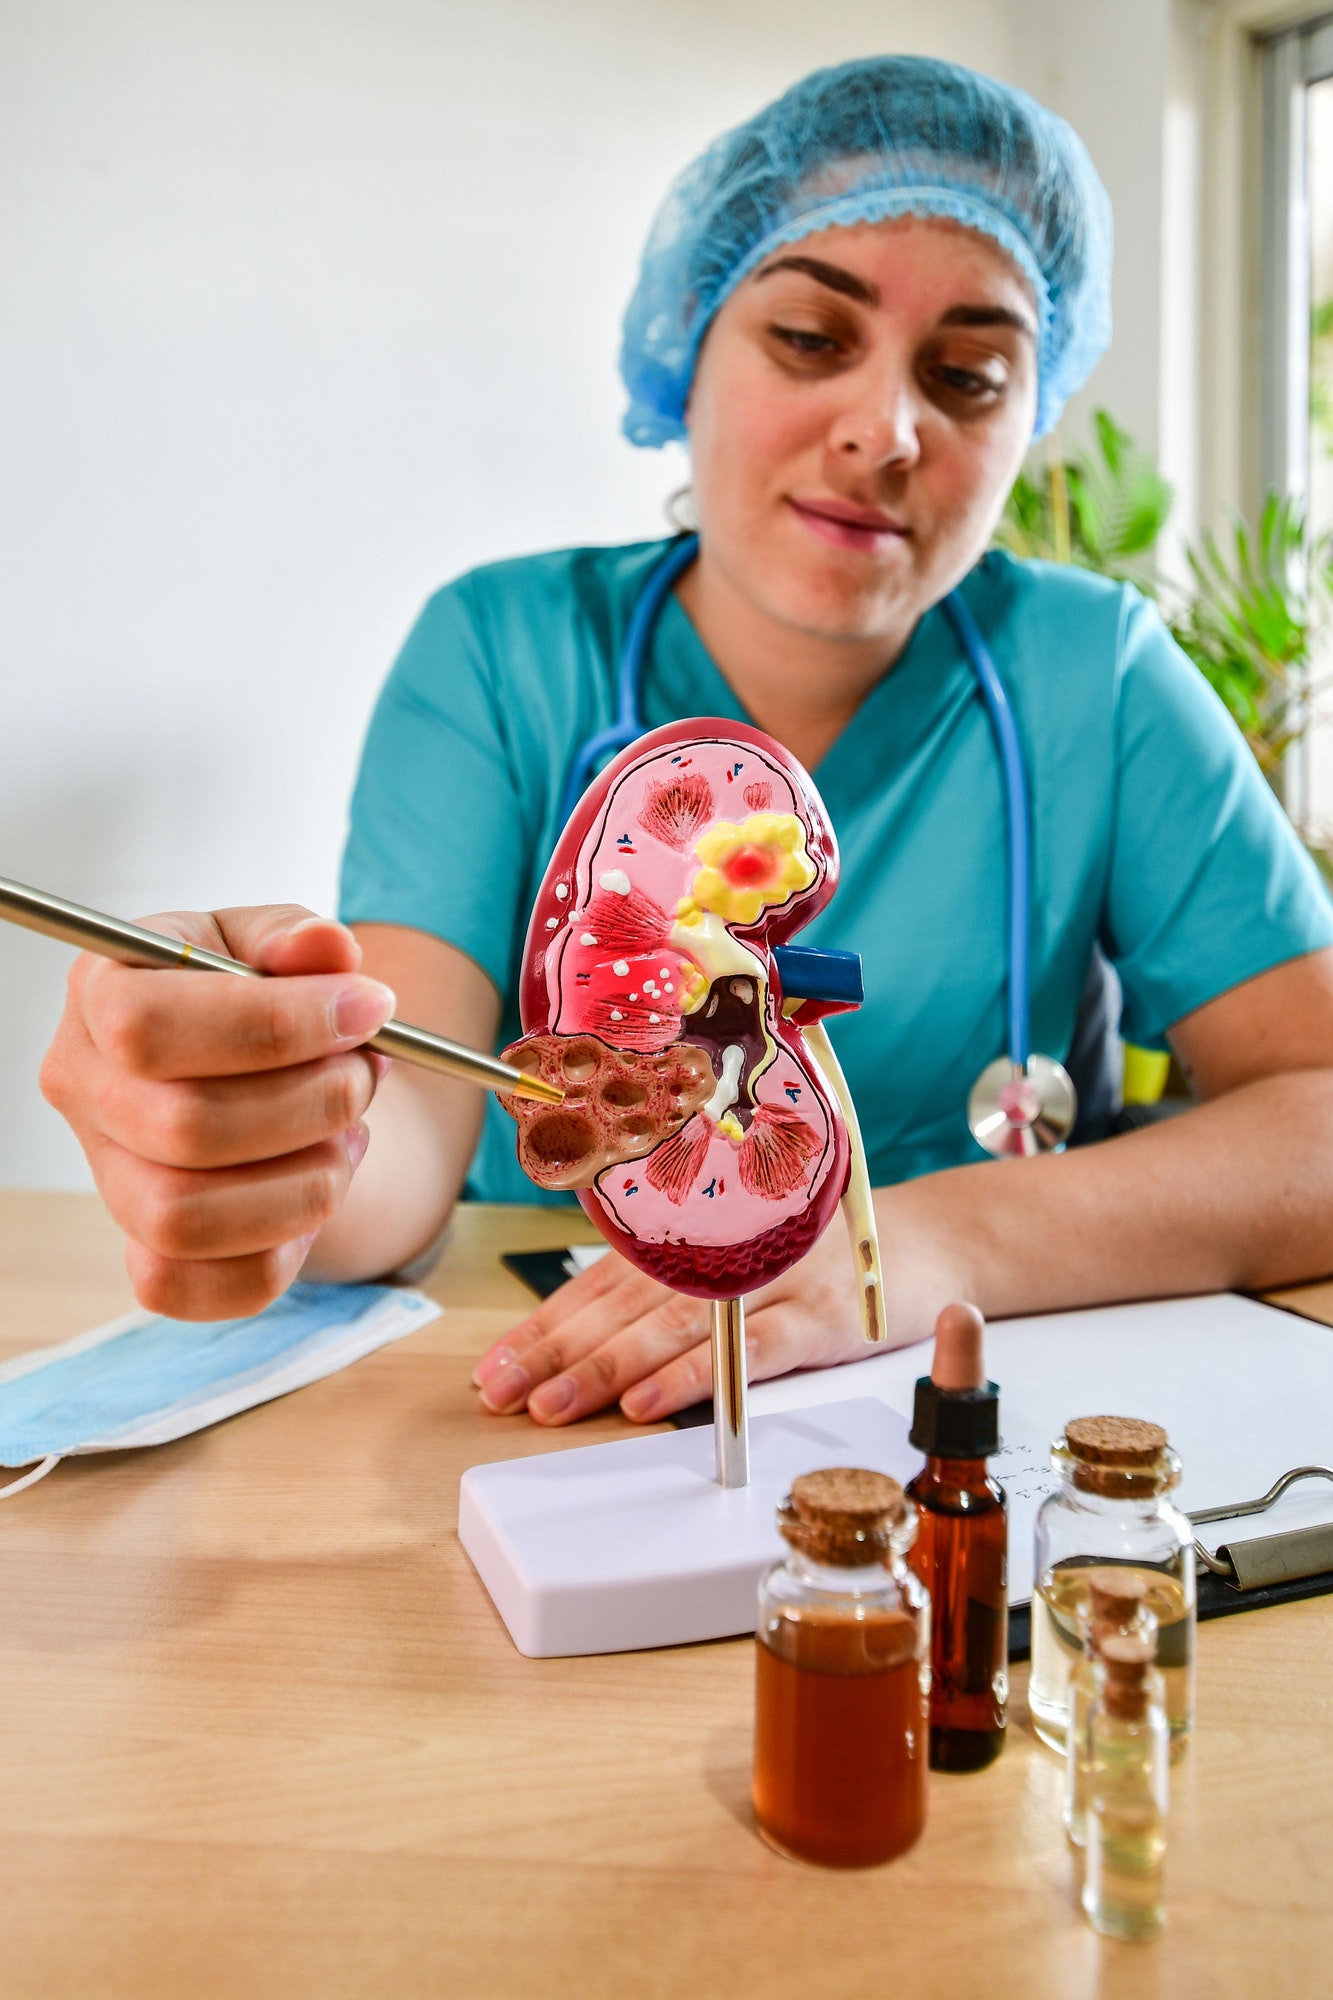 Closeup of a Doctor analyzing of patient kidney health using a kidney anatomical model